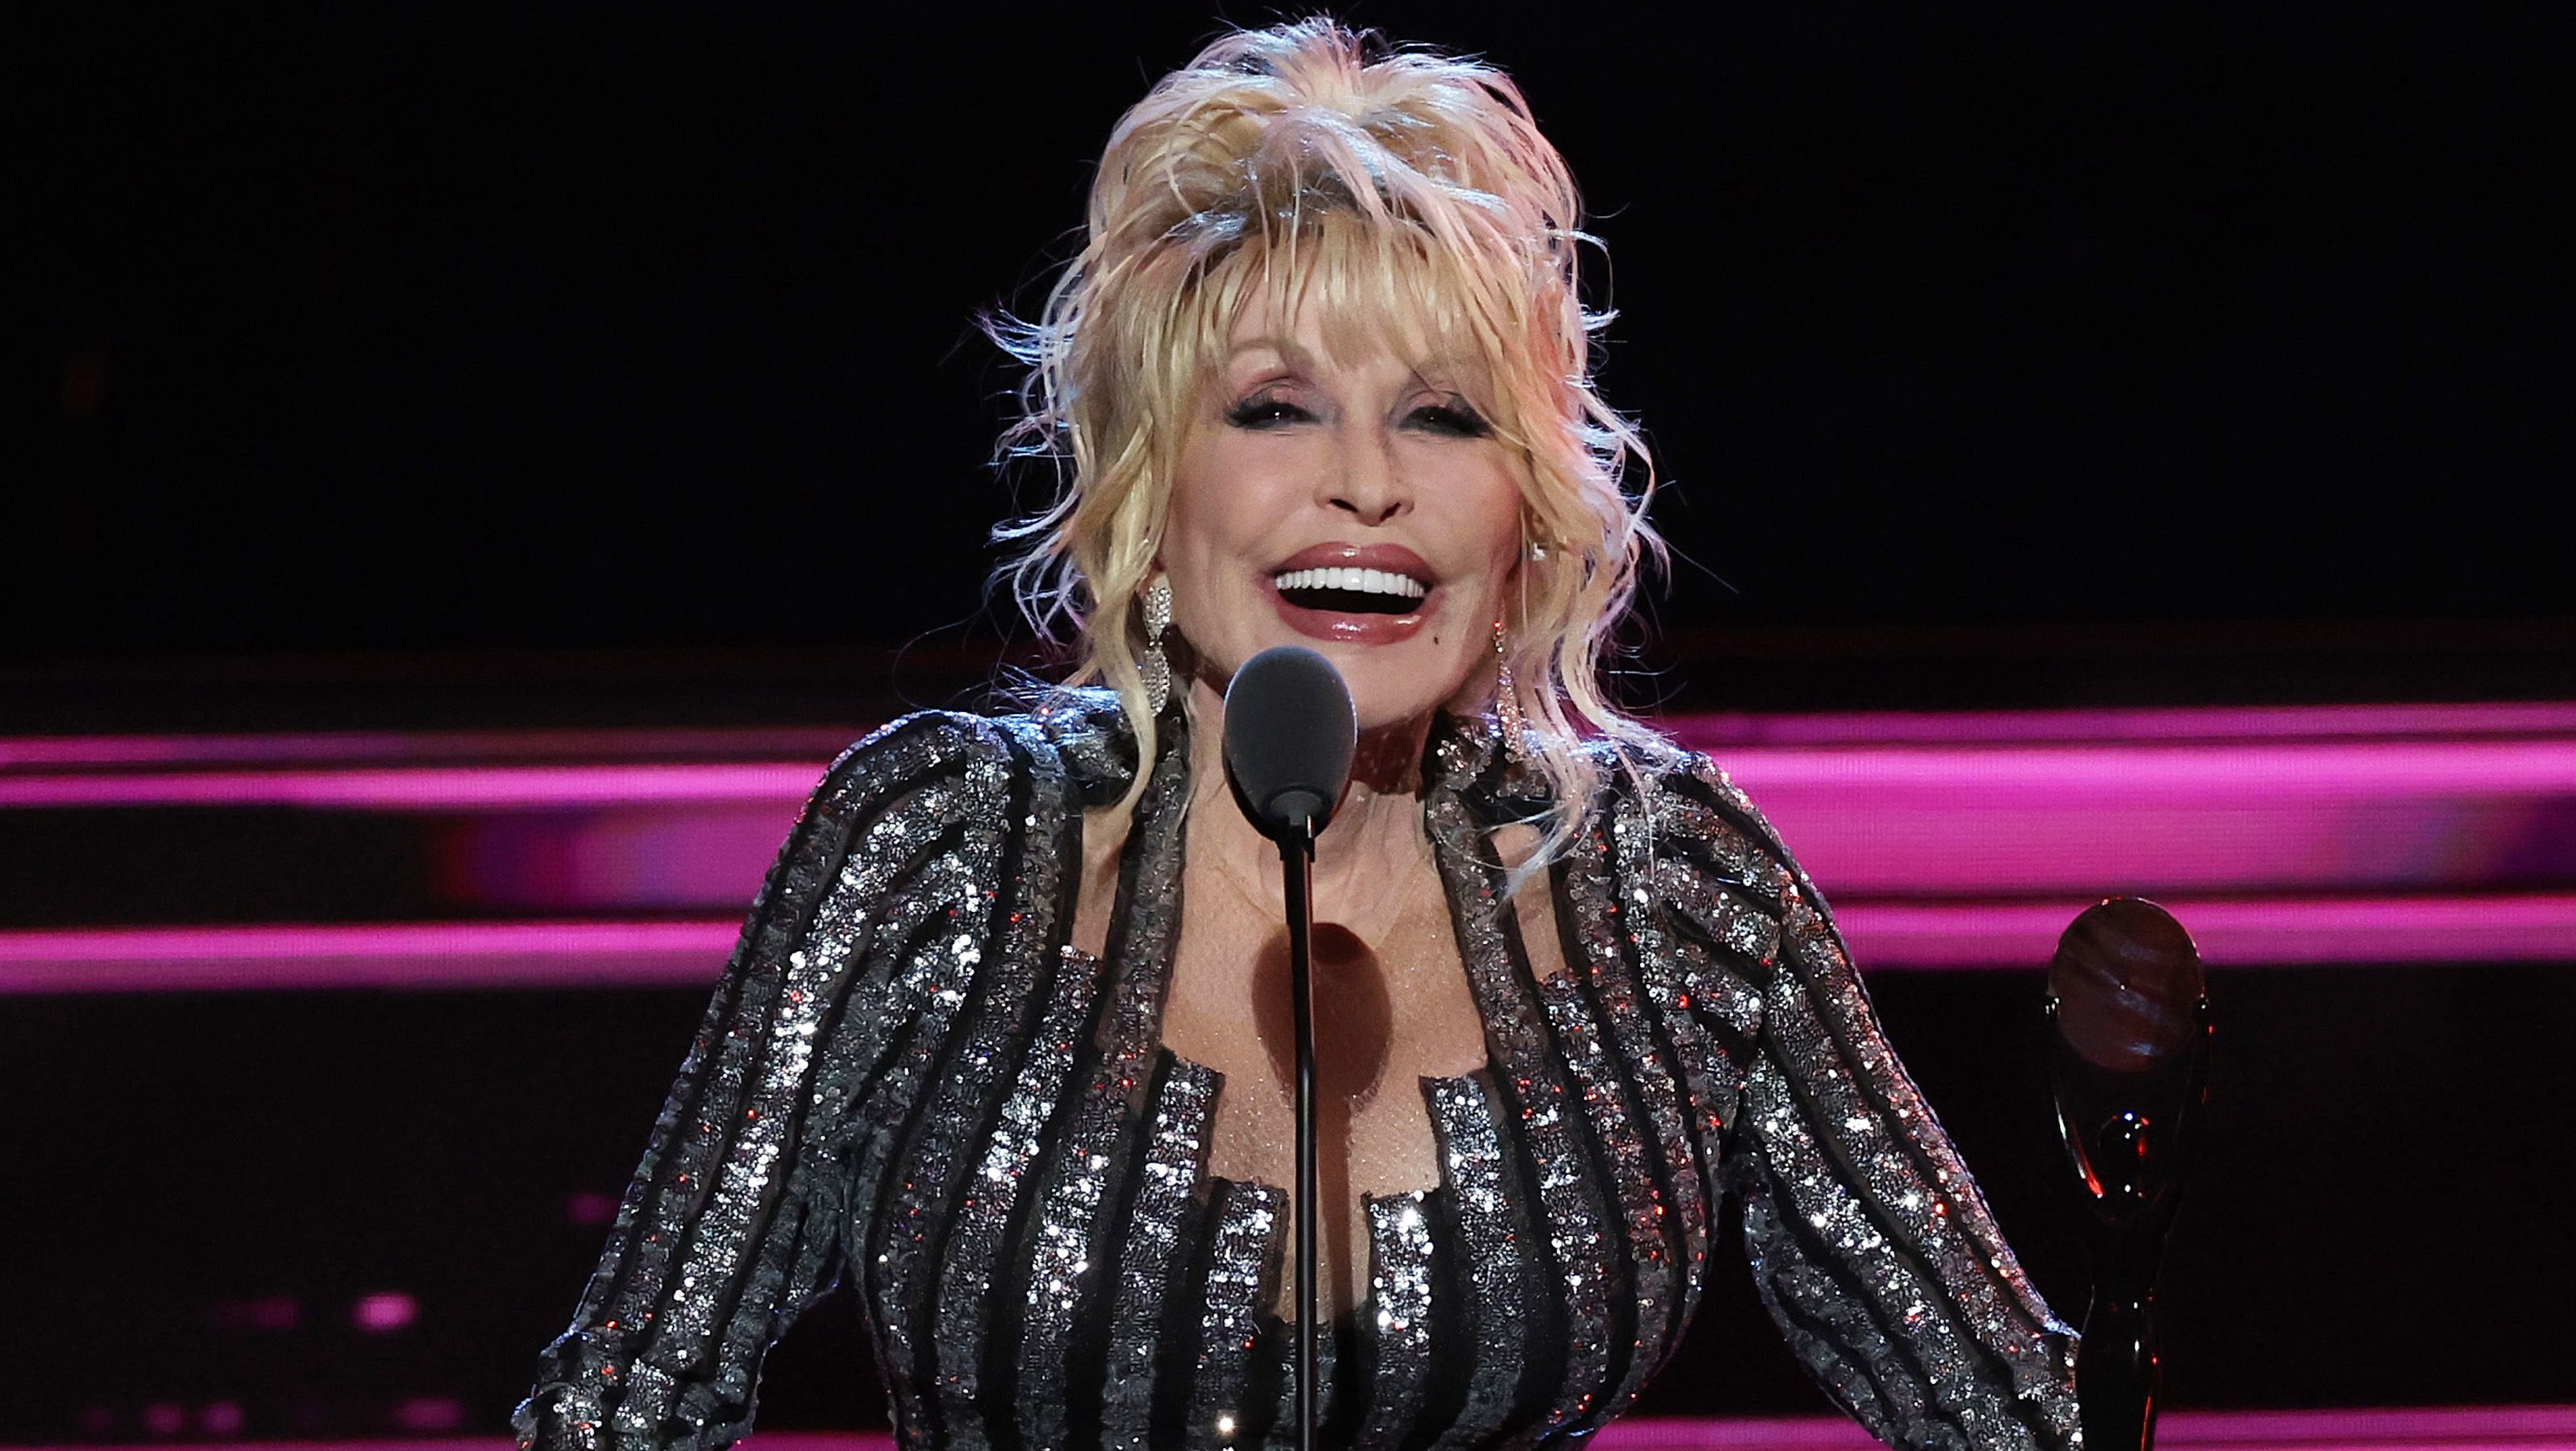 Dolly Parton shares new song 'Don’t Make Me Have To Come Down There'